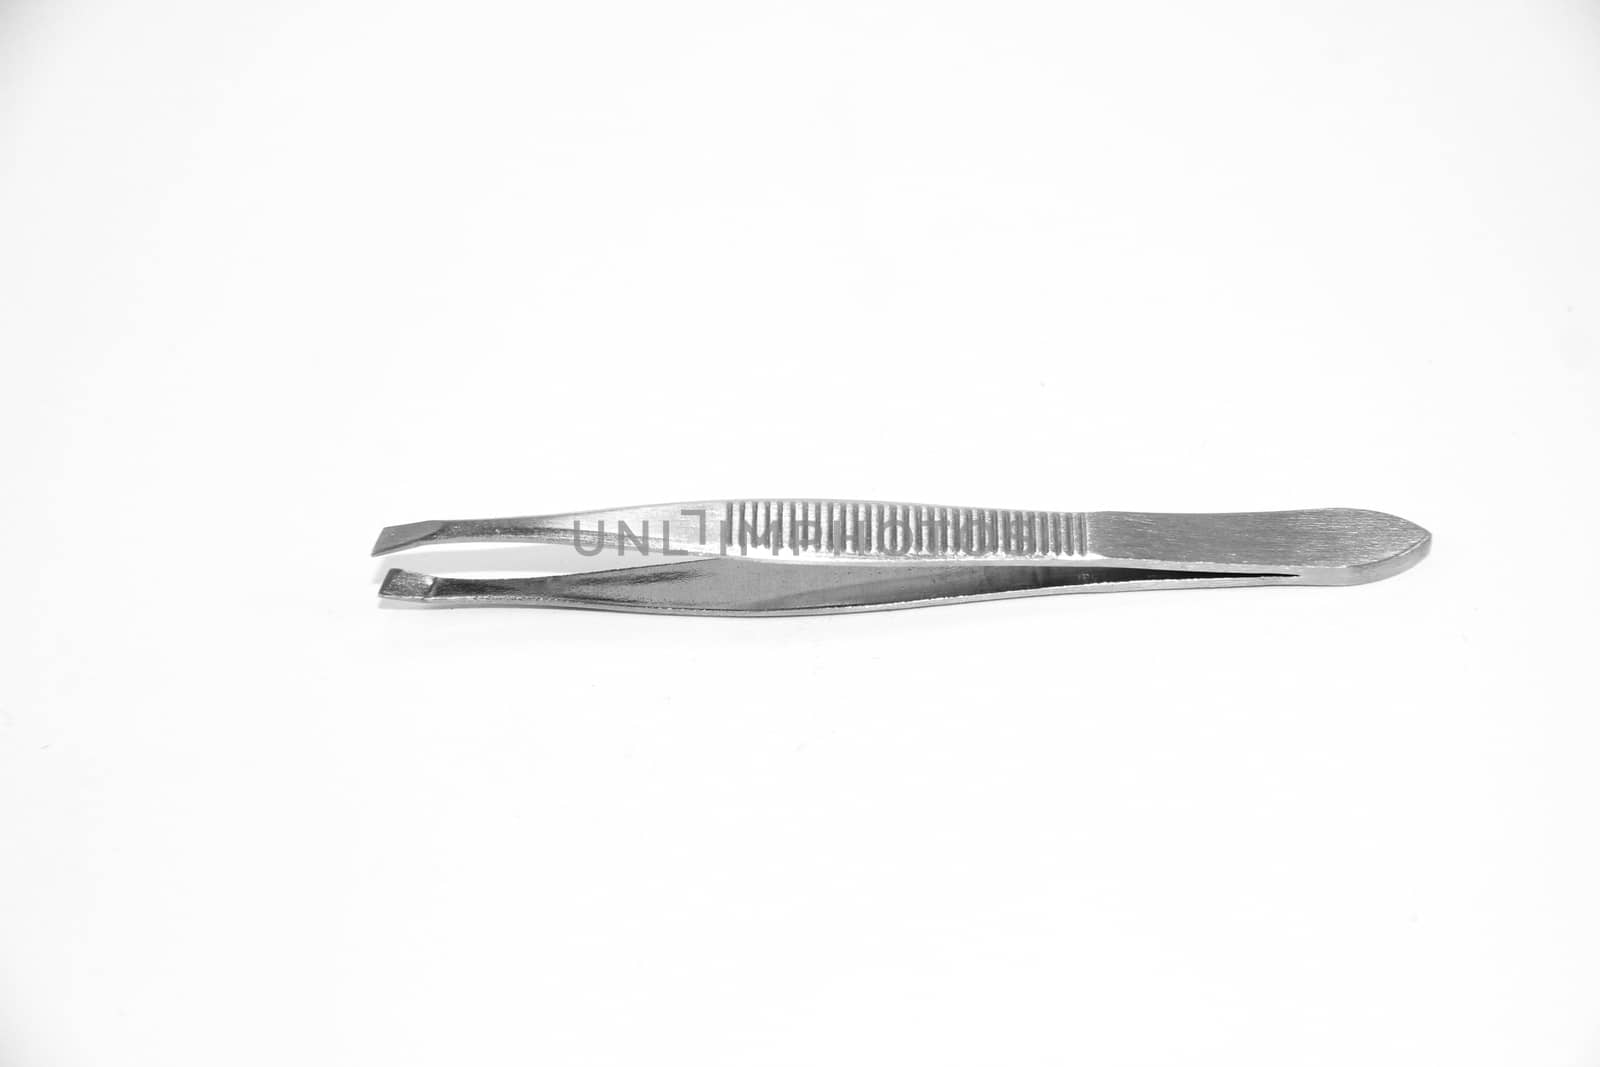 Little metal hair tweezers isolated over white background by nopparats